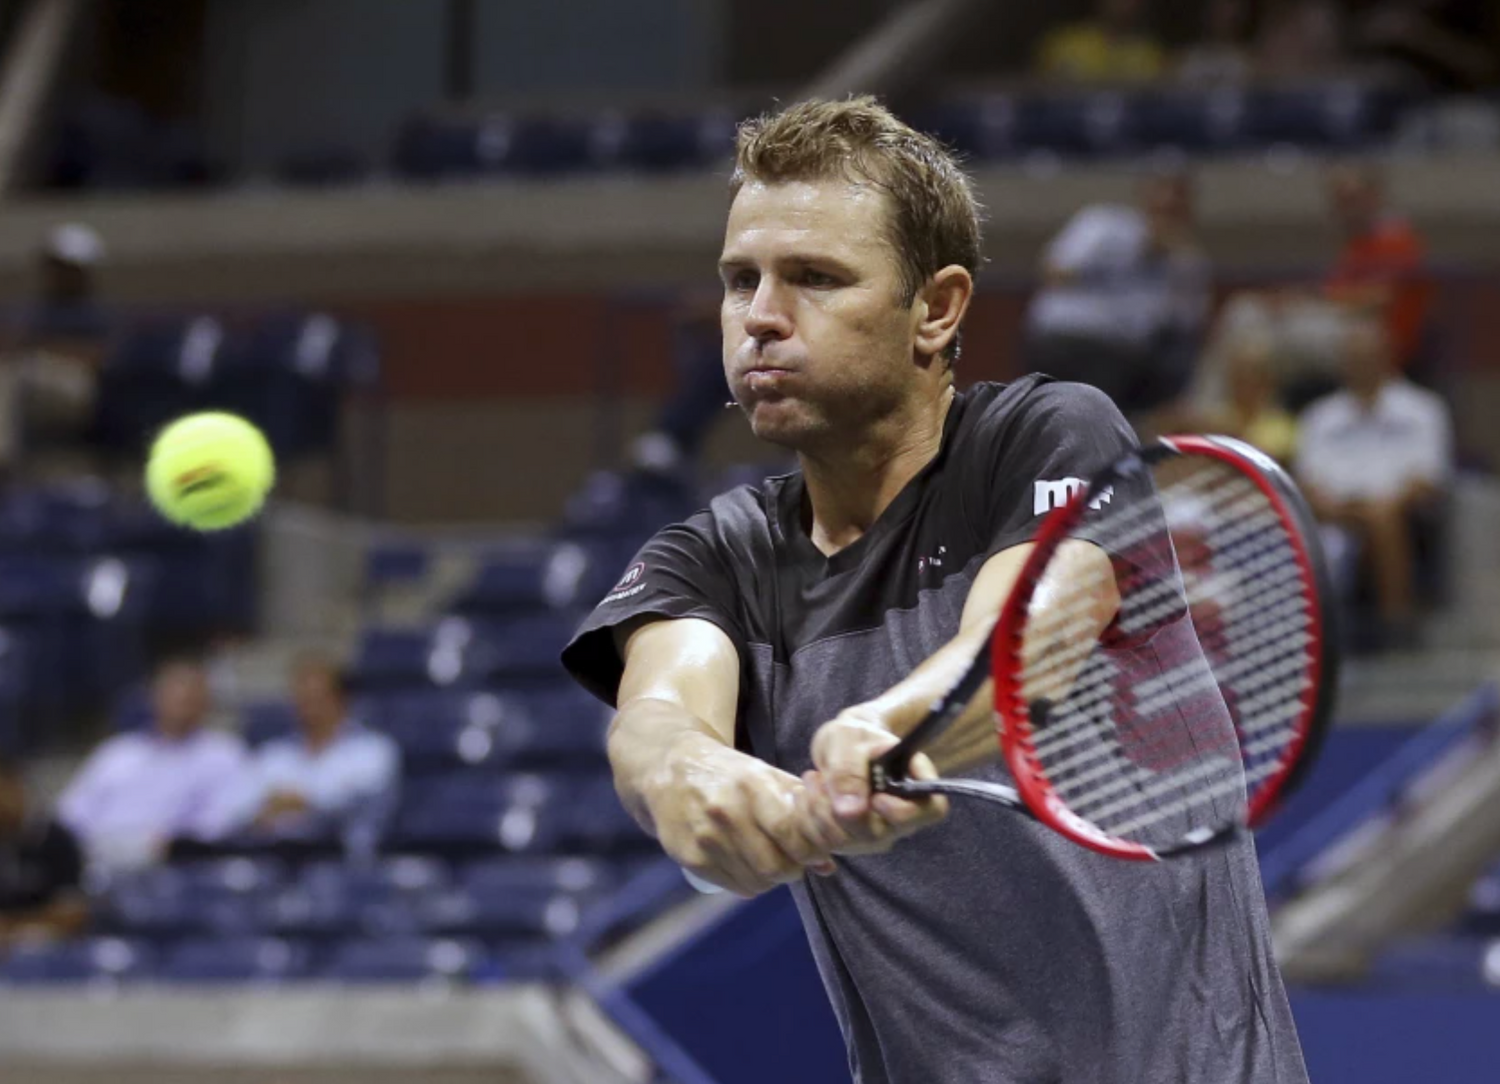 Mardy Fish shares moments his life ‘was a living hell’ with hope it can help others